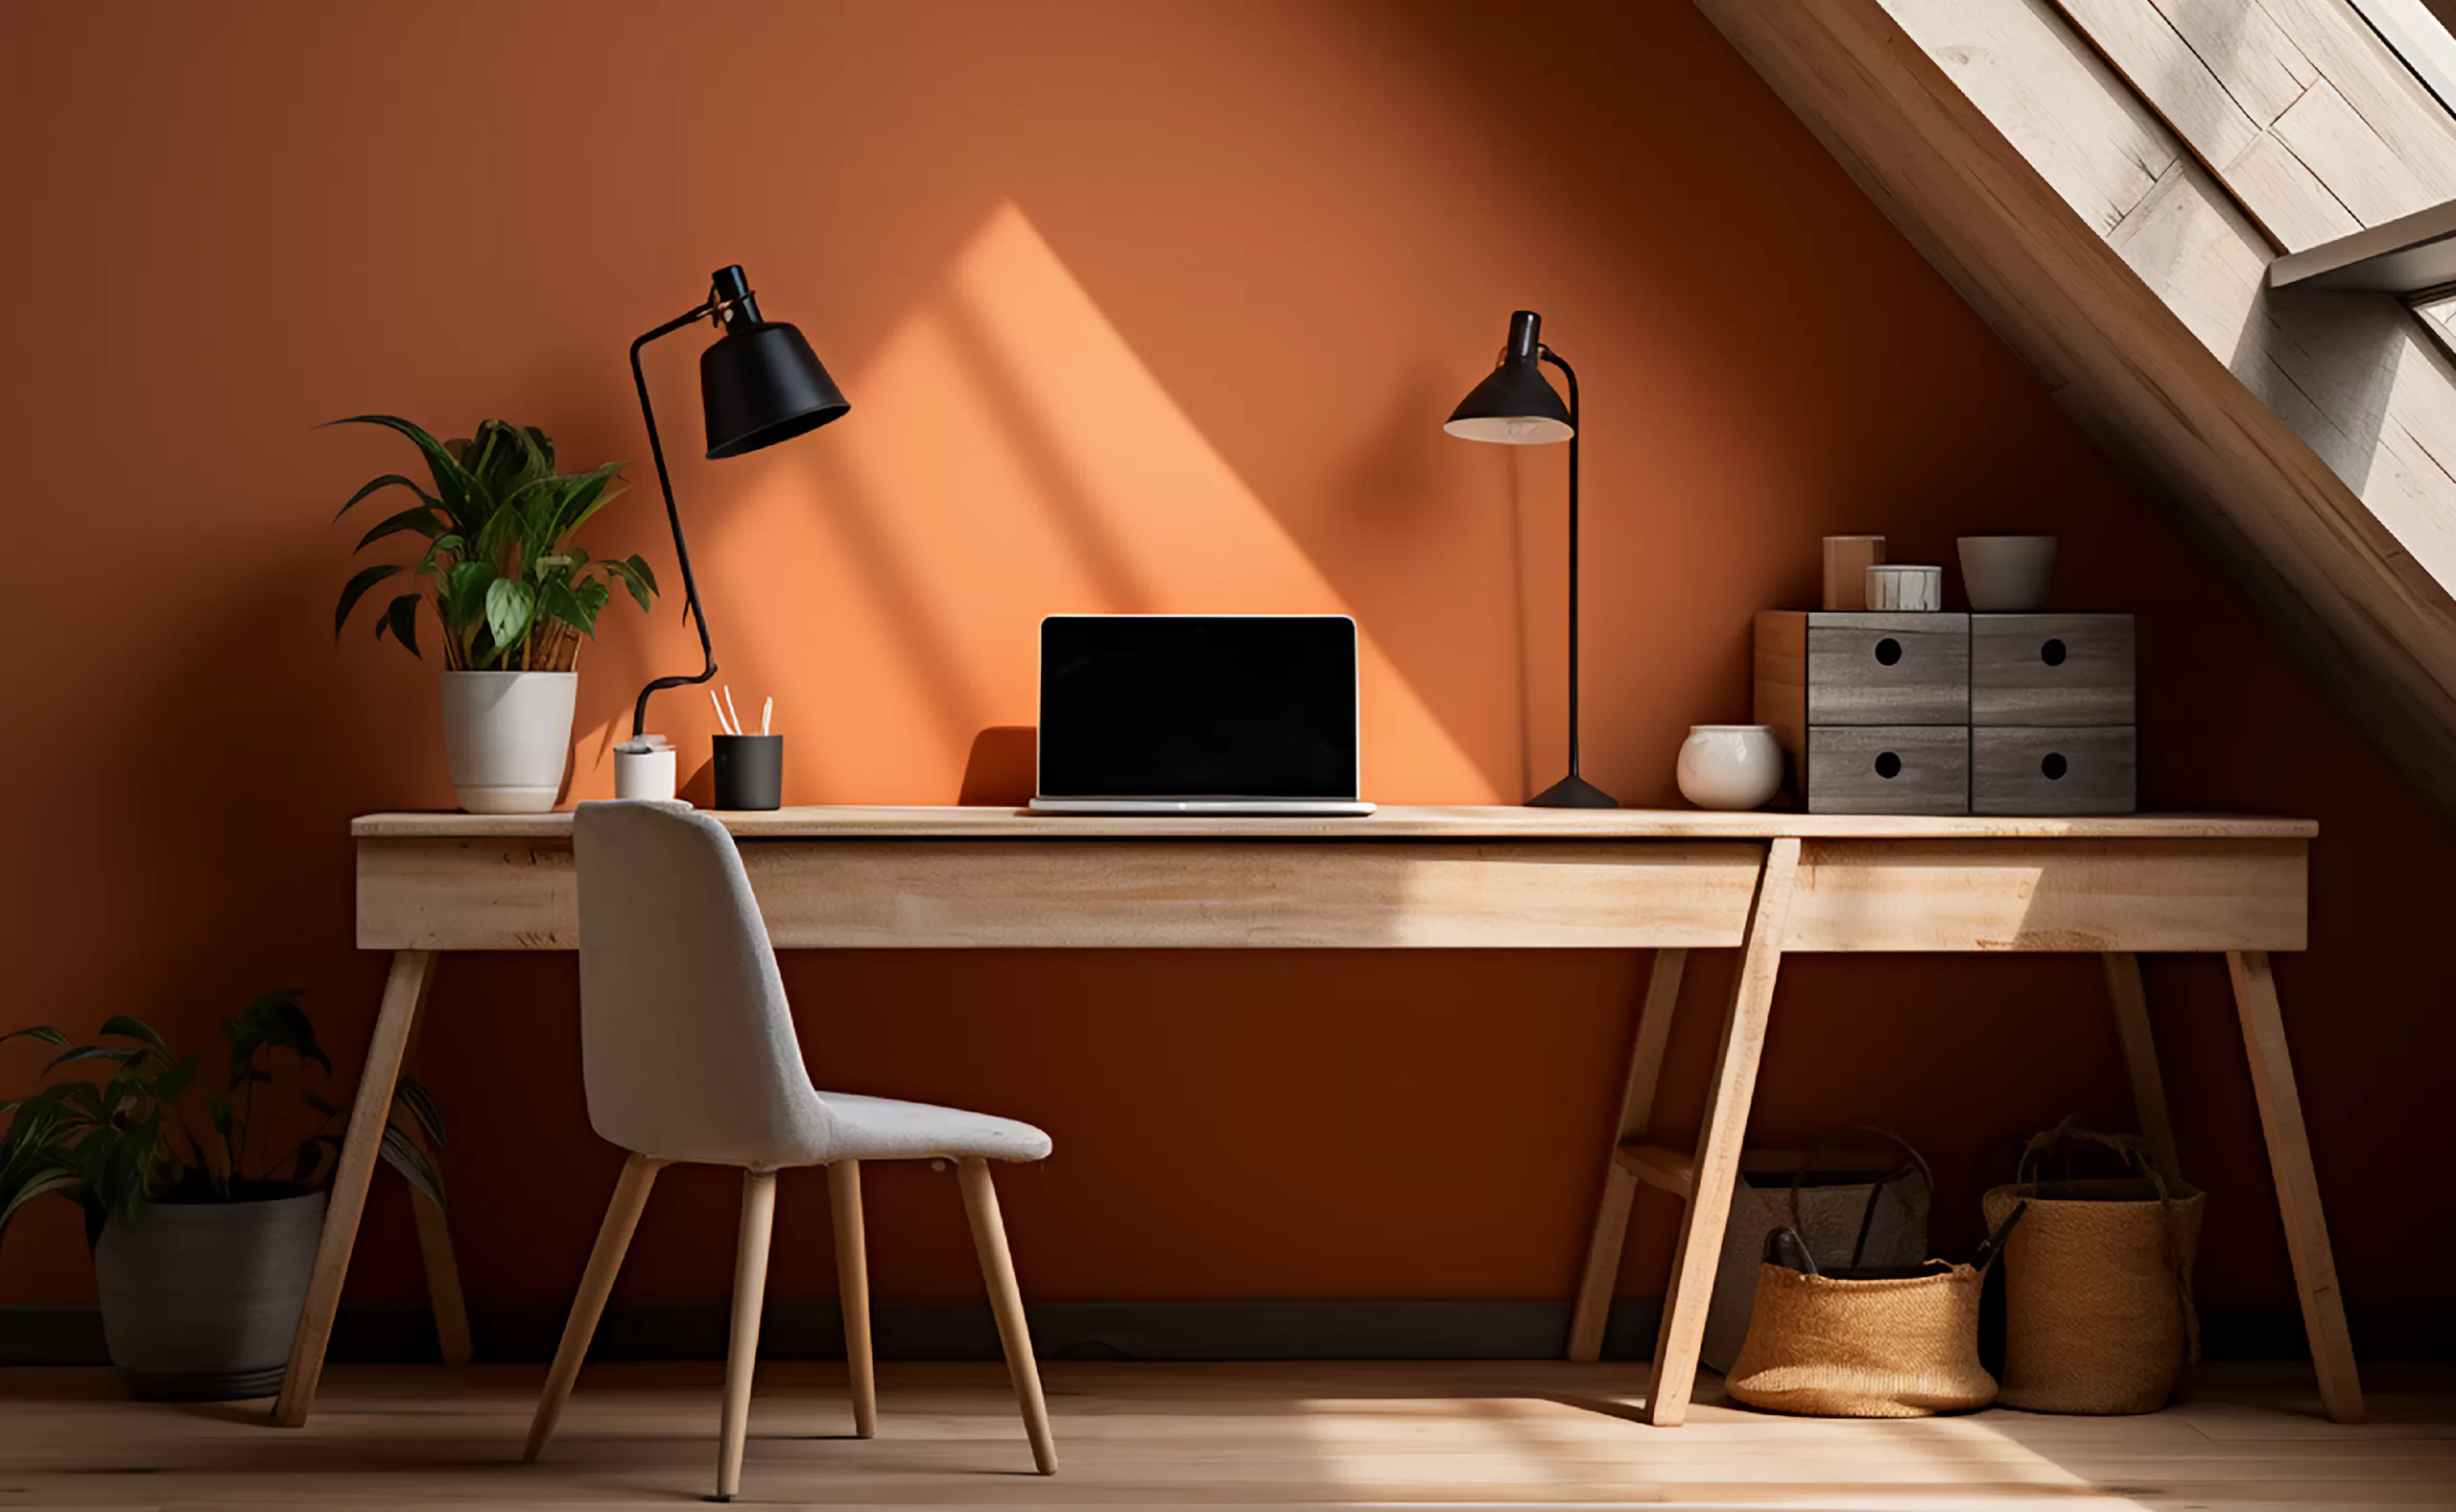 contemporary home office interior design with warm orange paint on interior walls